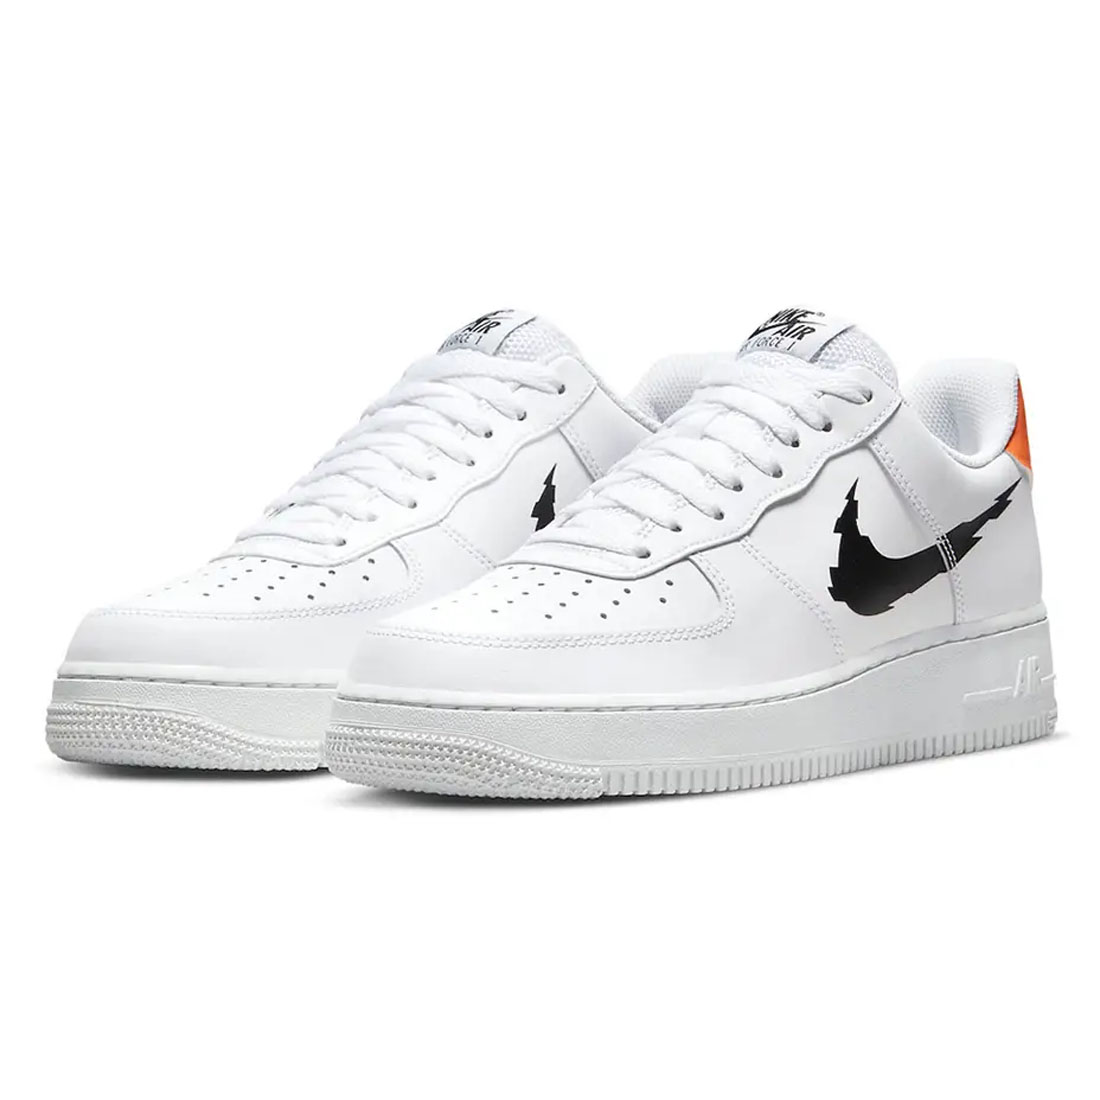 Nike Force 1 Low Glitch Swoosh Mens – Exclusive